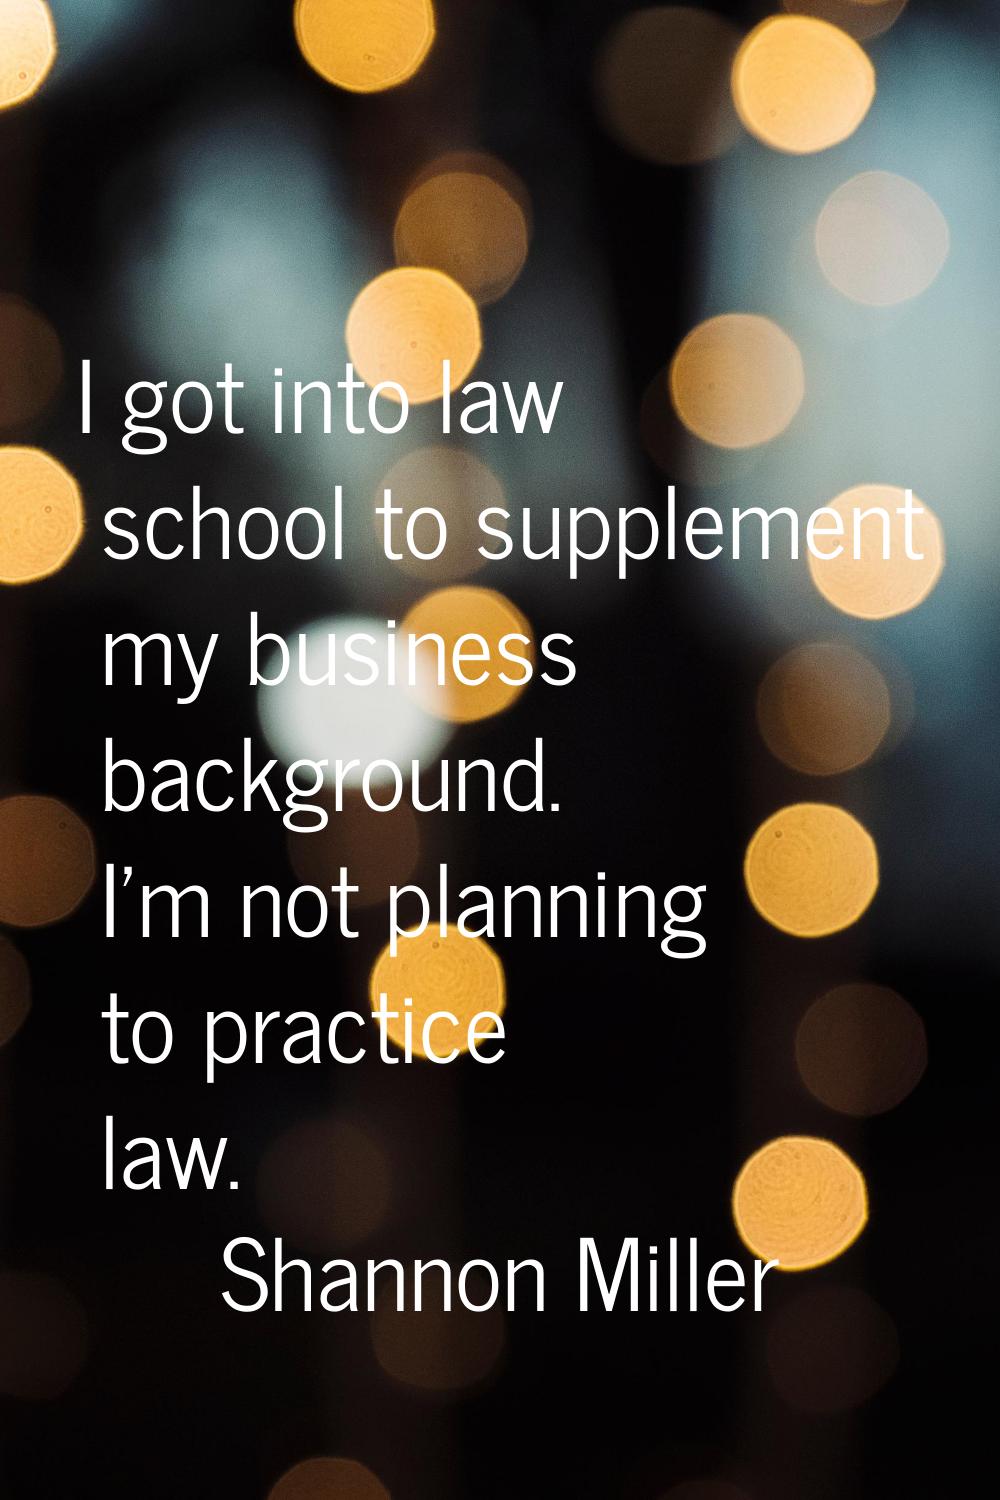 I got into law school to supplement my business background. I'm not planning to practice law.